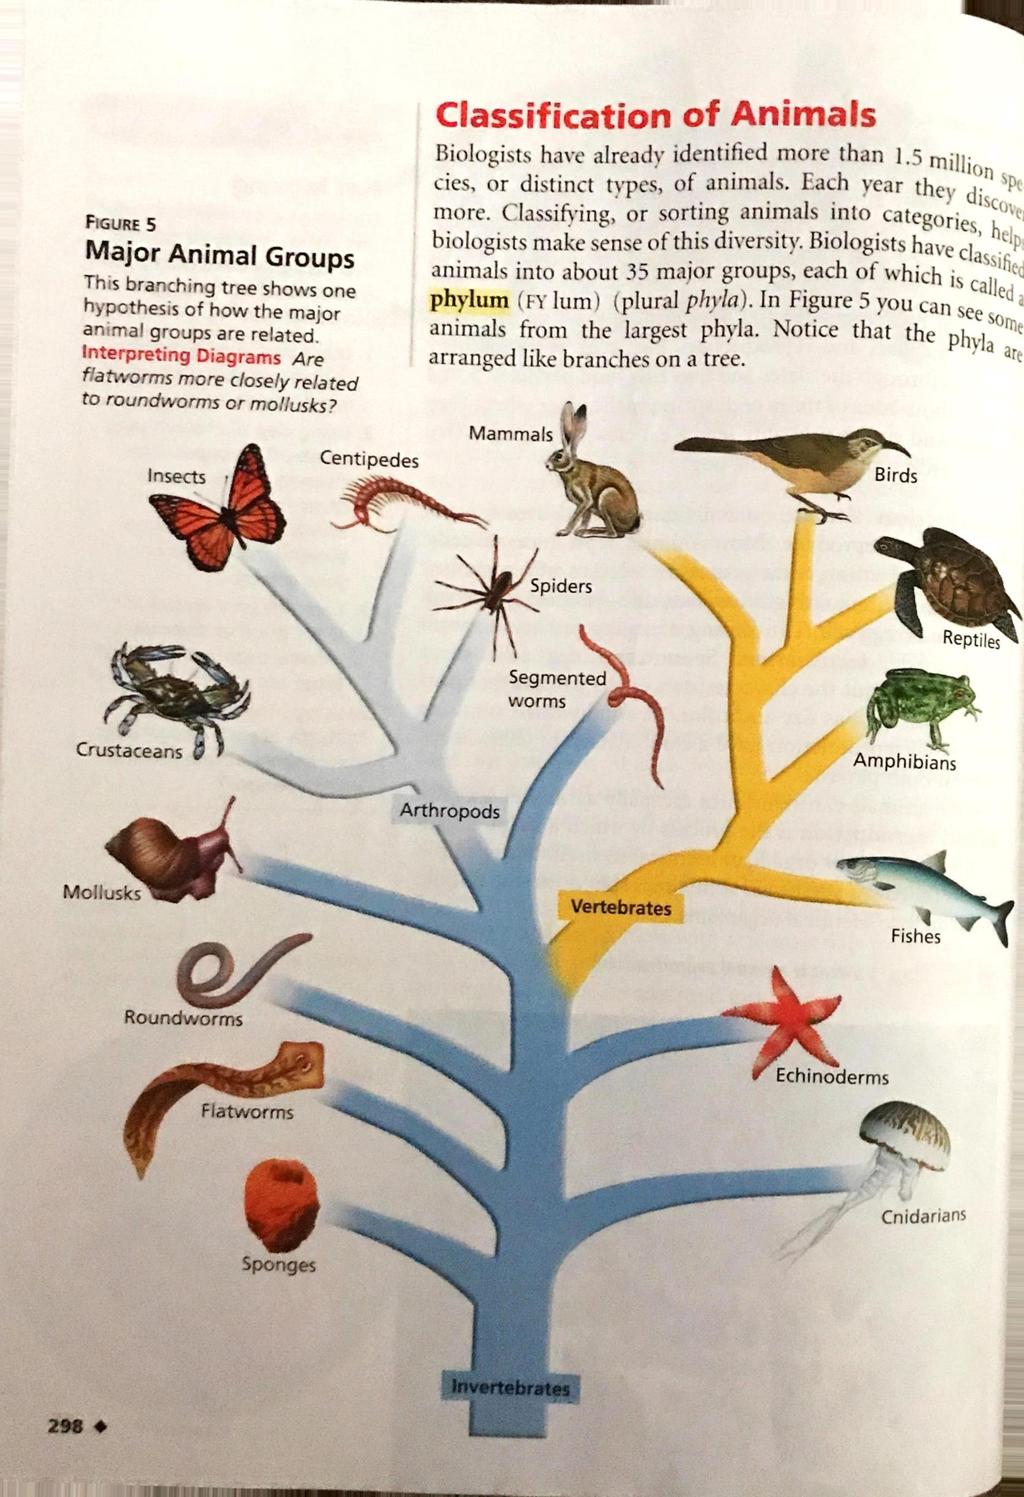 FIGURE 5 Major Animal Groups This branching tree shows one hypothesis of how the major animal groups are related. Interpreting Diagrams Are flatworms more closely related to roundworms or mollusks?